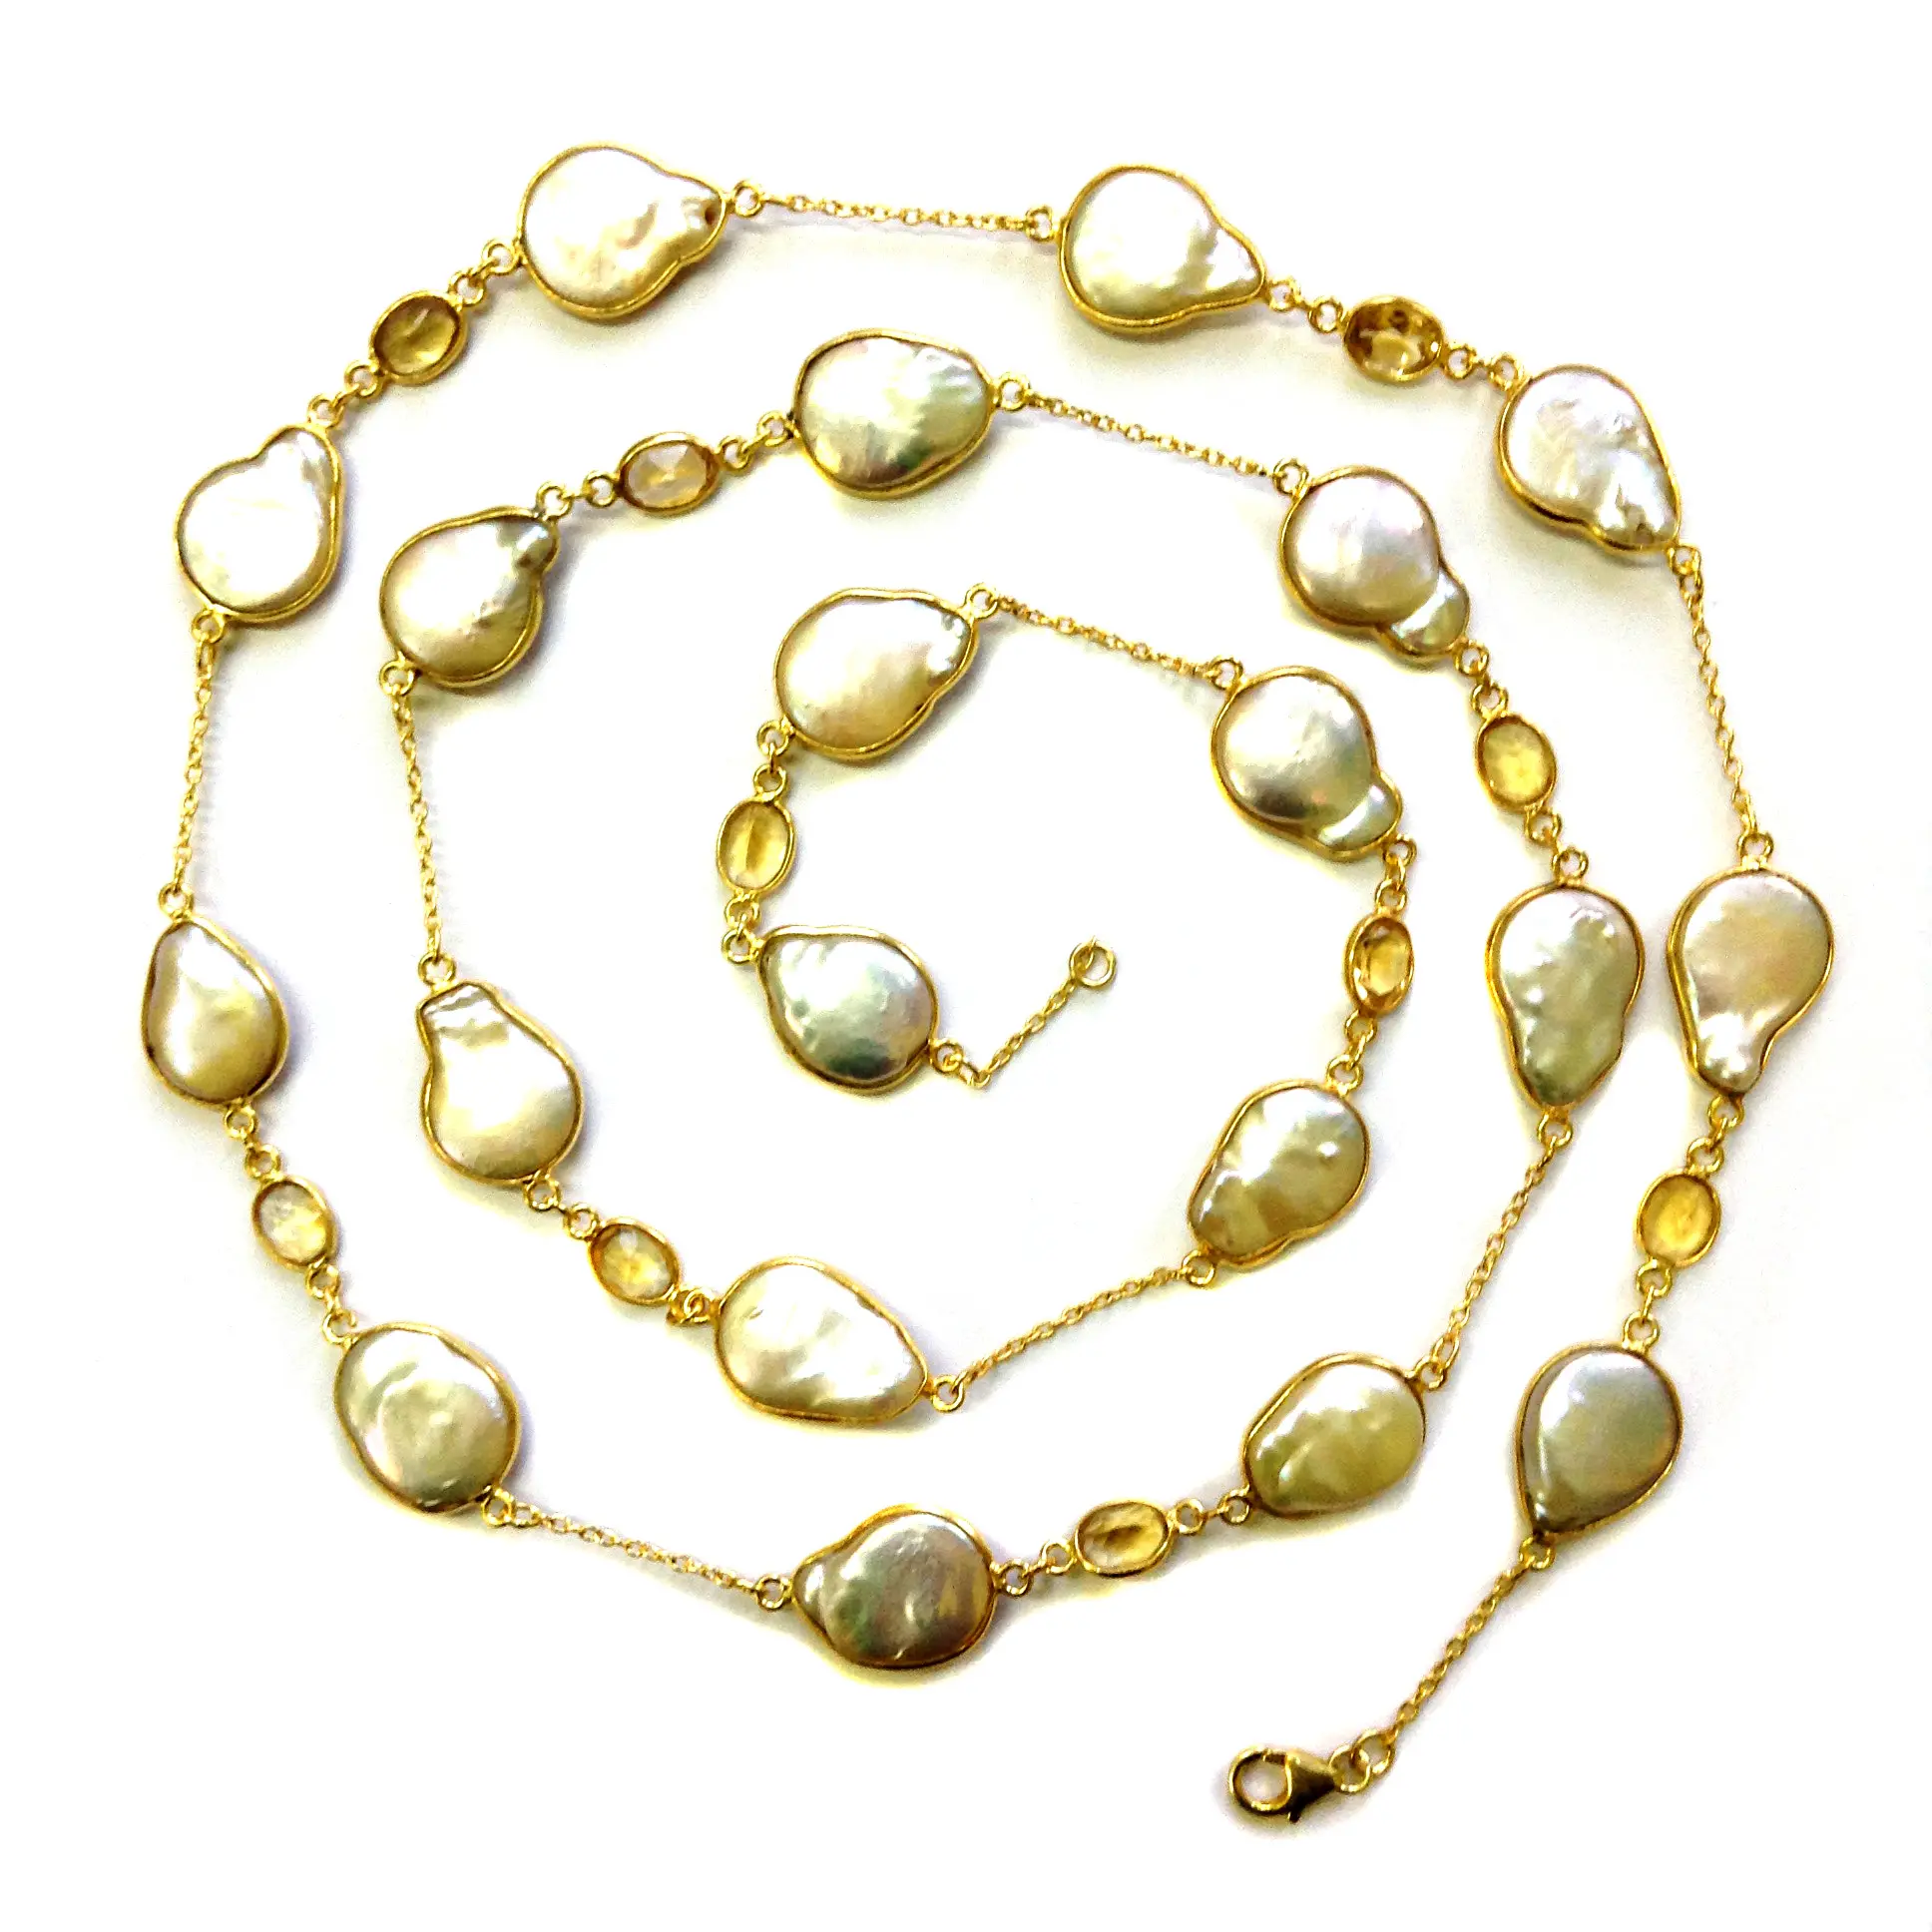 Handmade Baroque Pearl & Citrine Gemstone Necklace 925 Sterling Silver Gold Plated Trendy Fashionable Long Chain Necklace Party